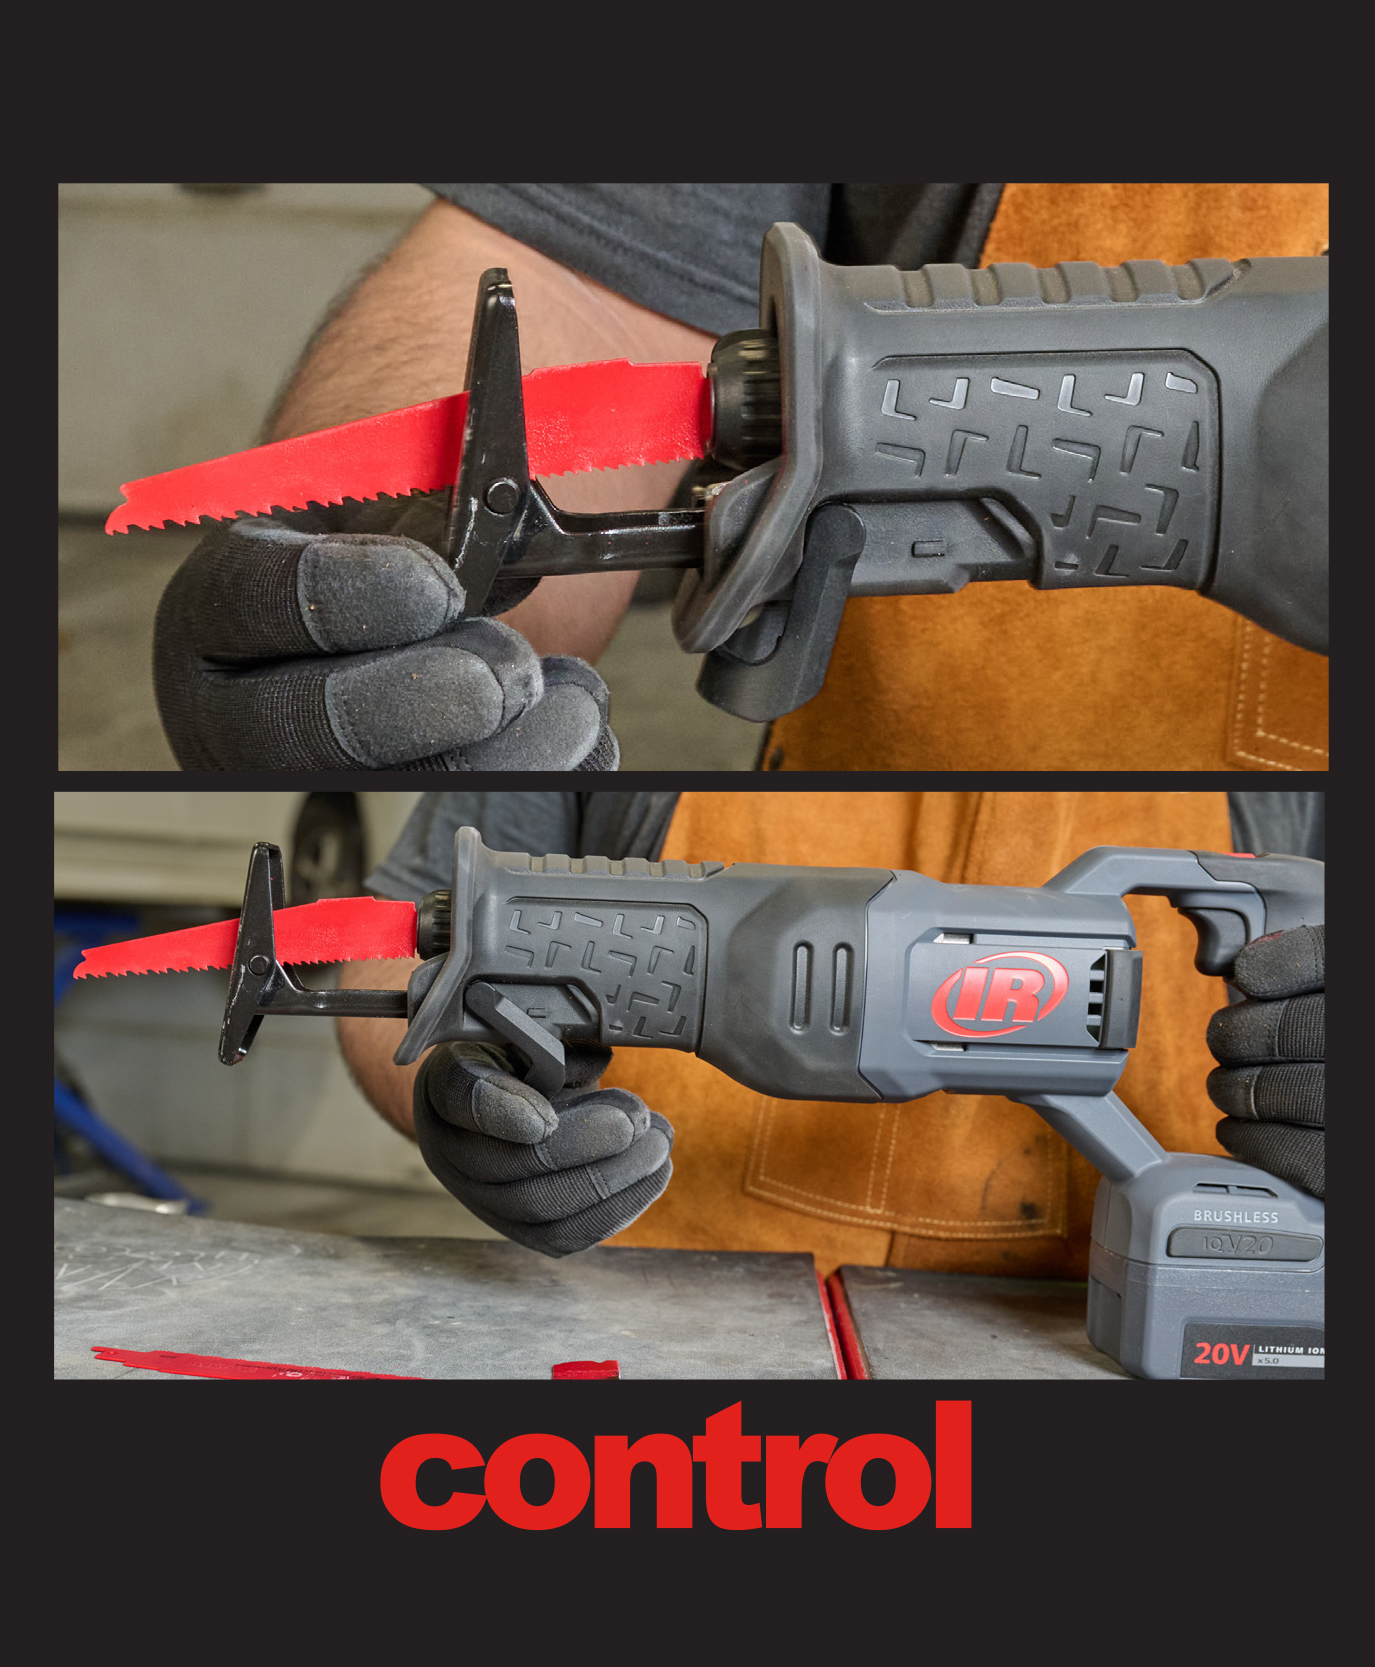 cordless recip saw features an adjustable show for greater control and blade longetivity.